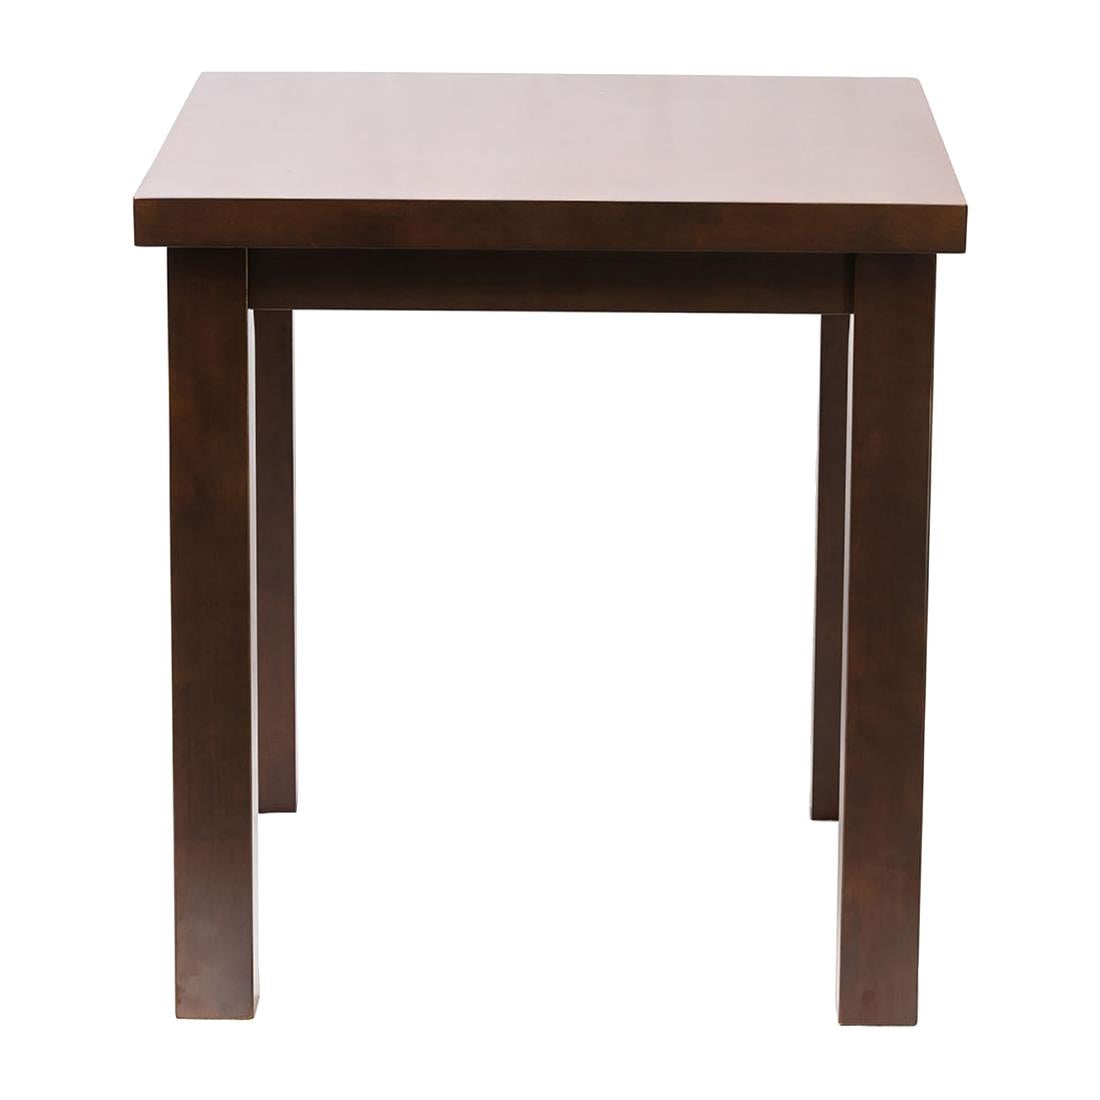 FT487 Kendal Square Dining Table Dark Wood 700x700mm JD Catering Equipment Solutions Ltd